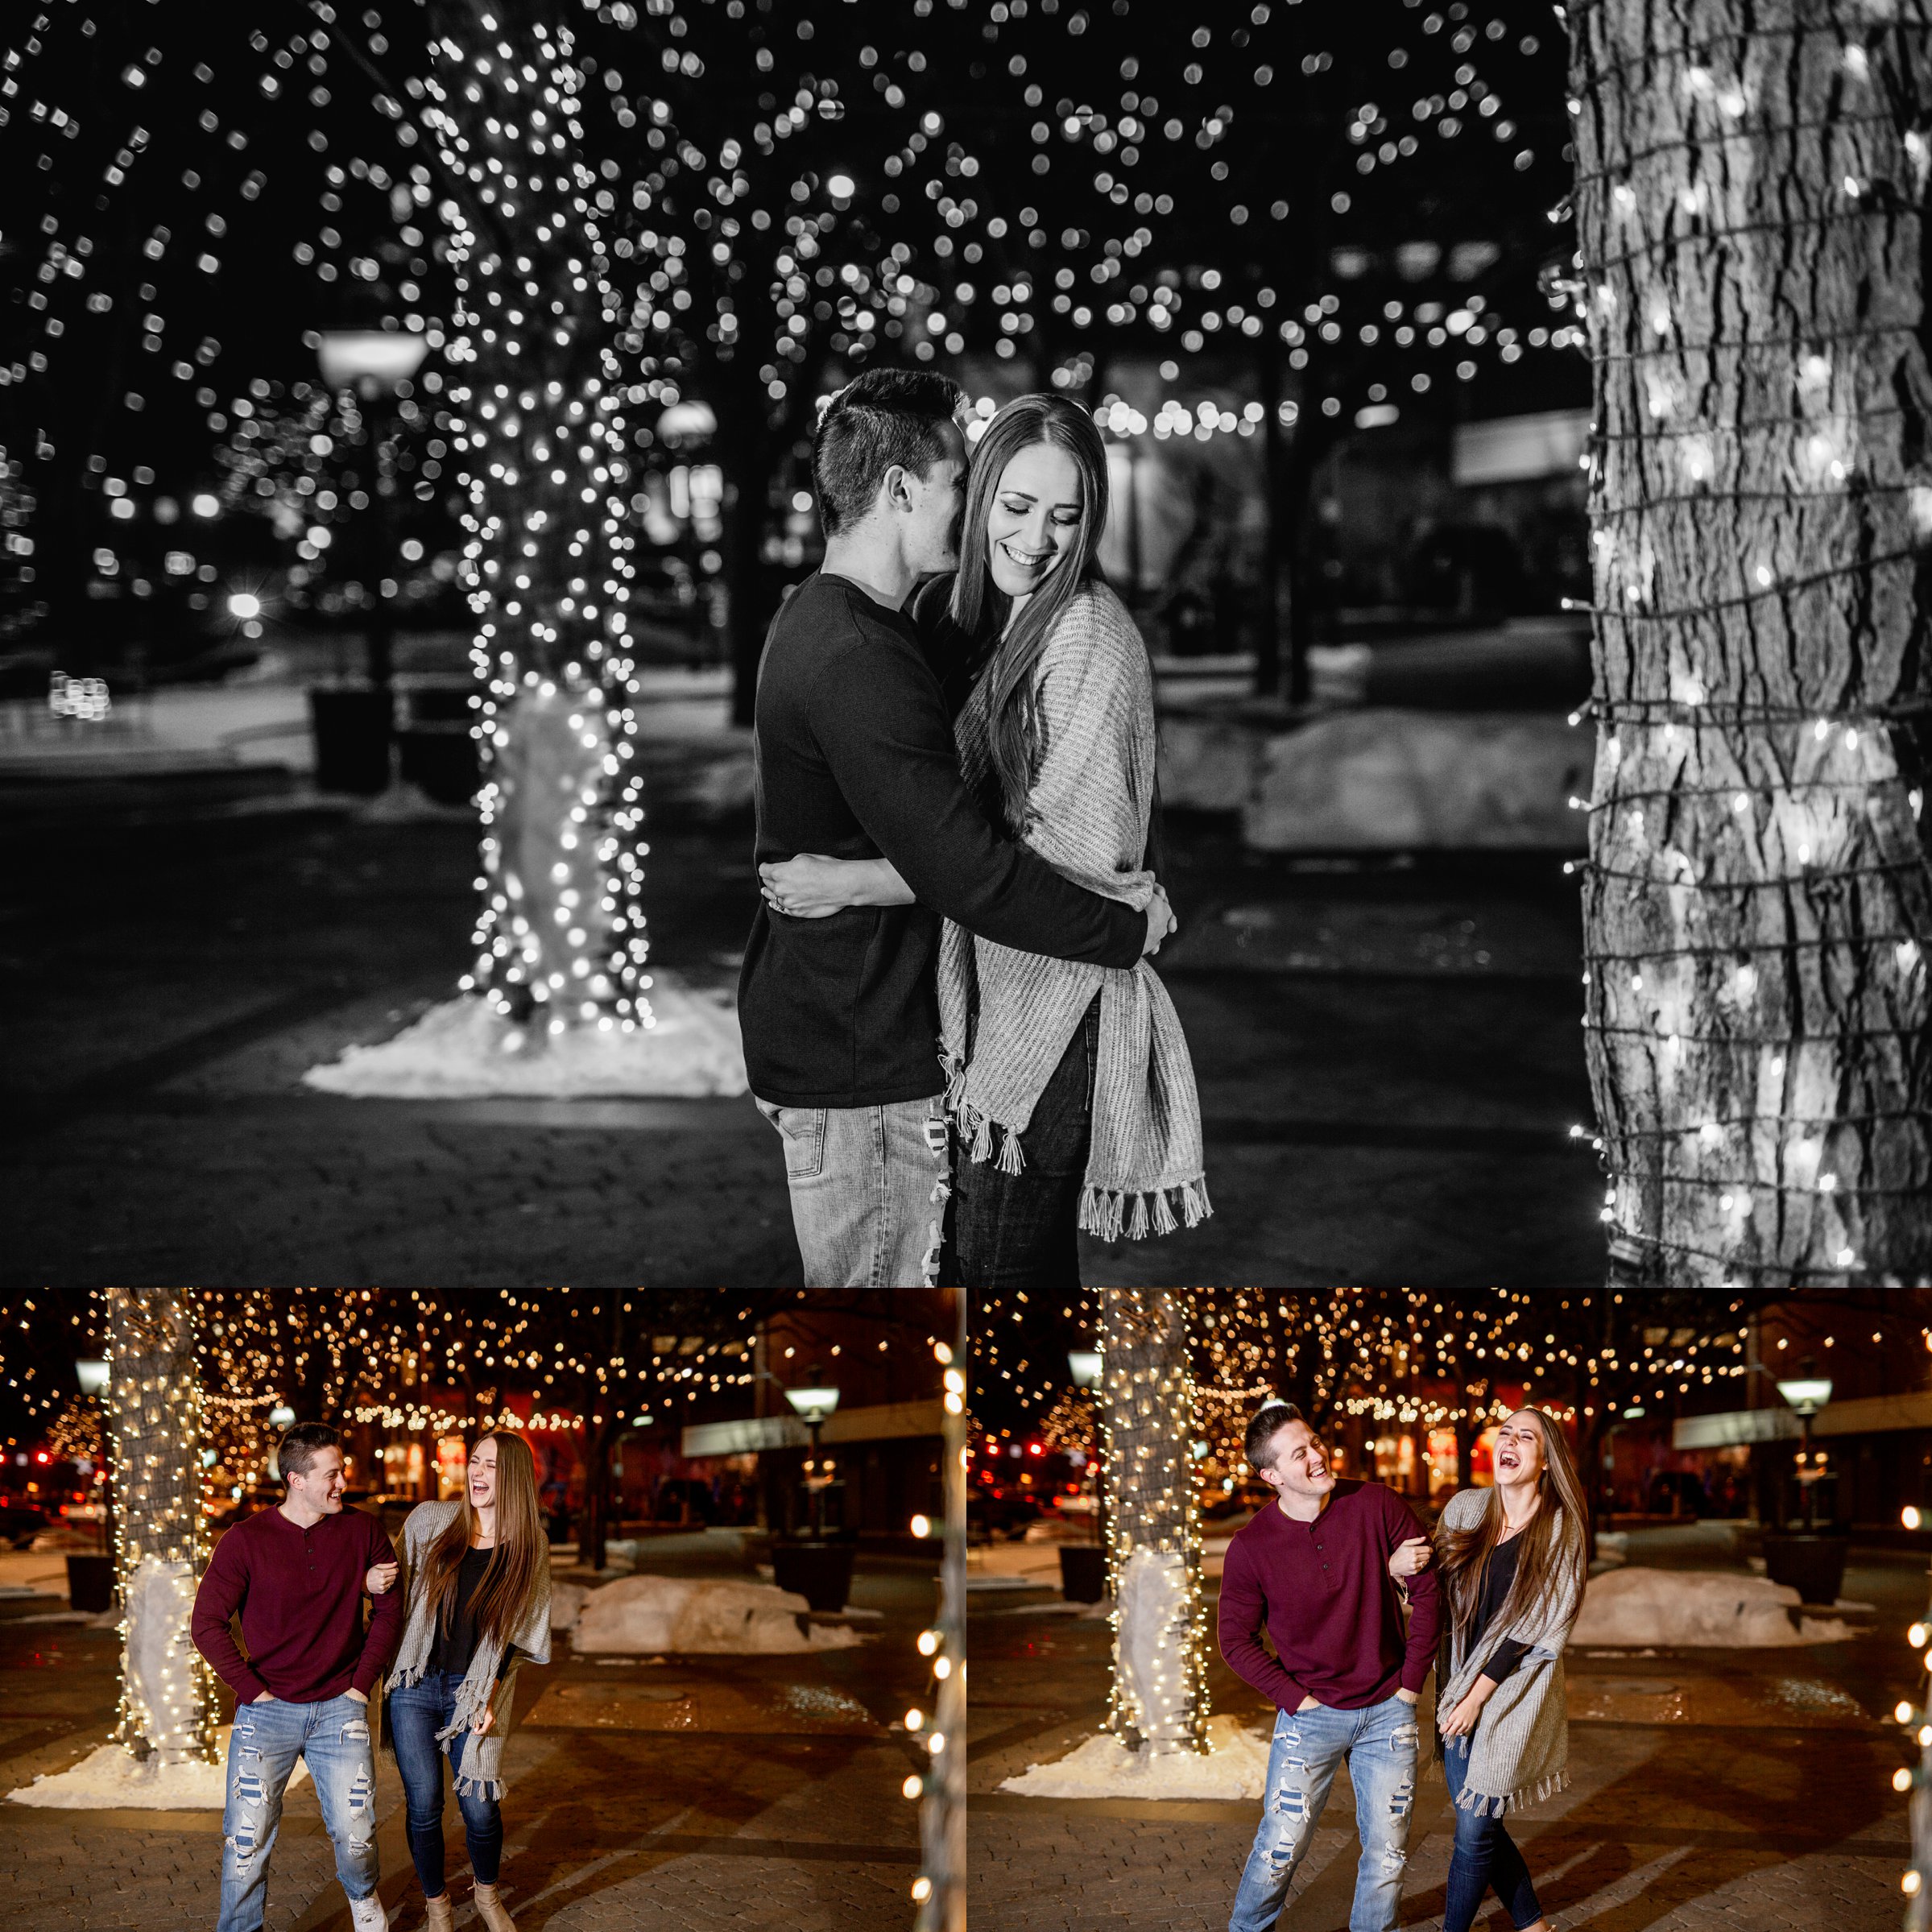 Engaged couple in downtown fort collins lights at night laughing and walking together